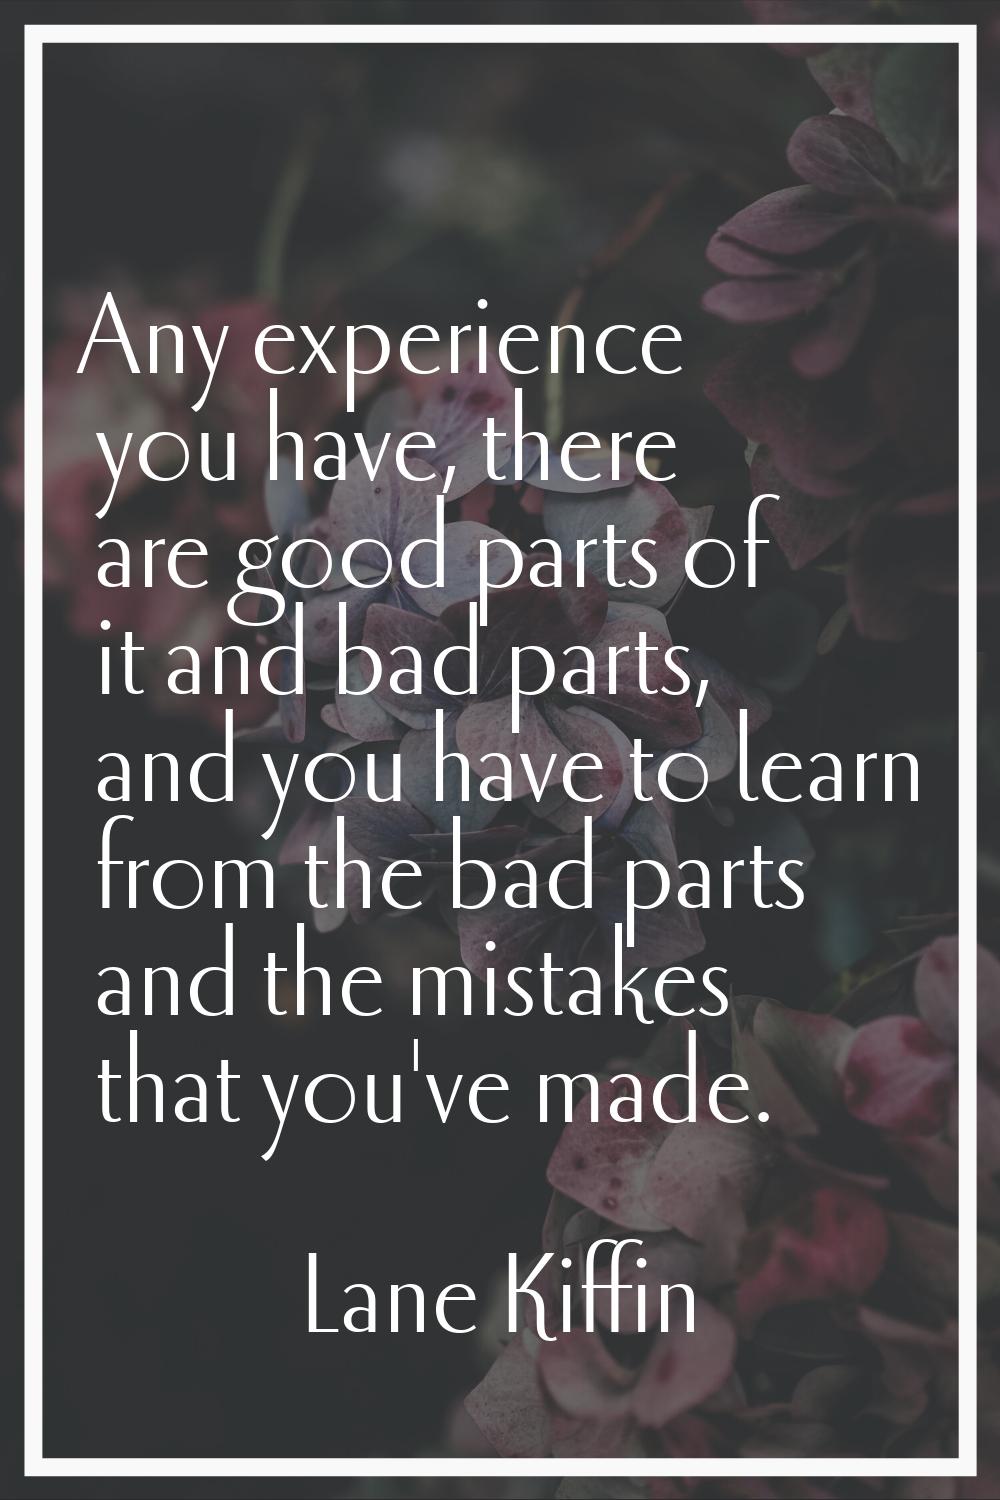 Any experience you have, there are good parts of it and bad parts, and you have to learn from the b